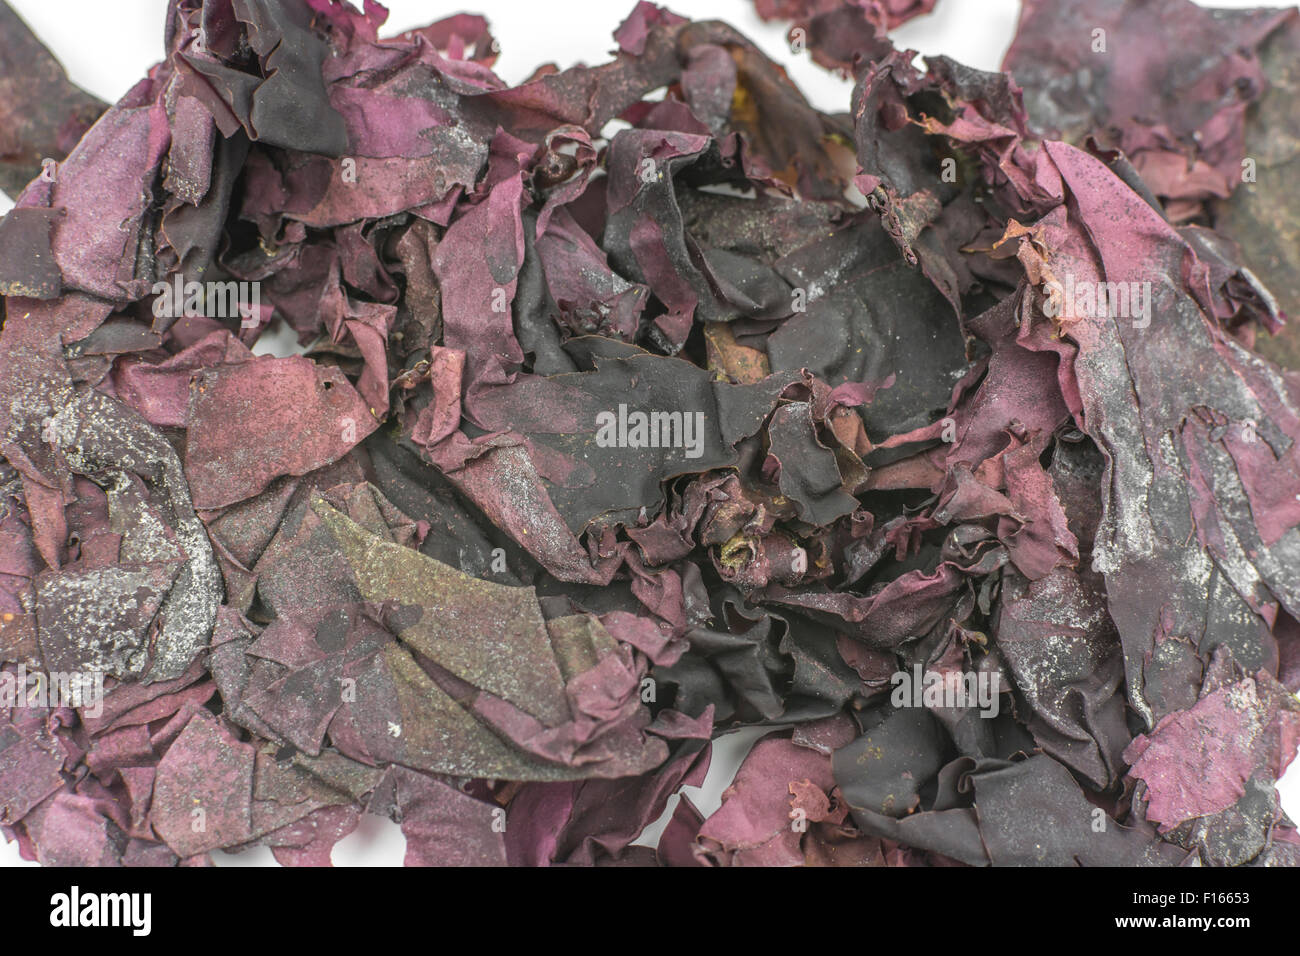 Dulse (Palmaria palmata), and edible seaweed. Seen here in its dried form, it is sometimes used as a dried snack. Stock Photo